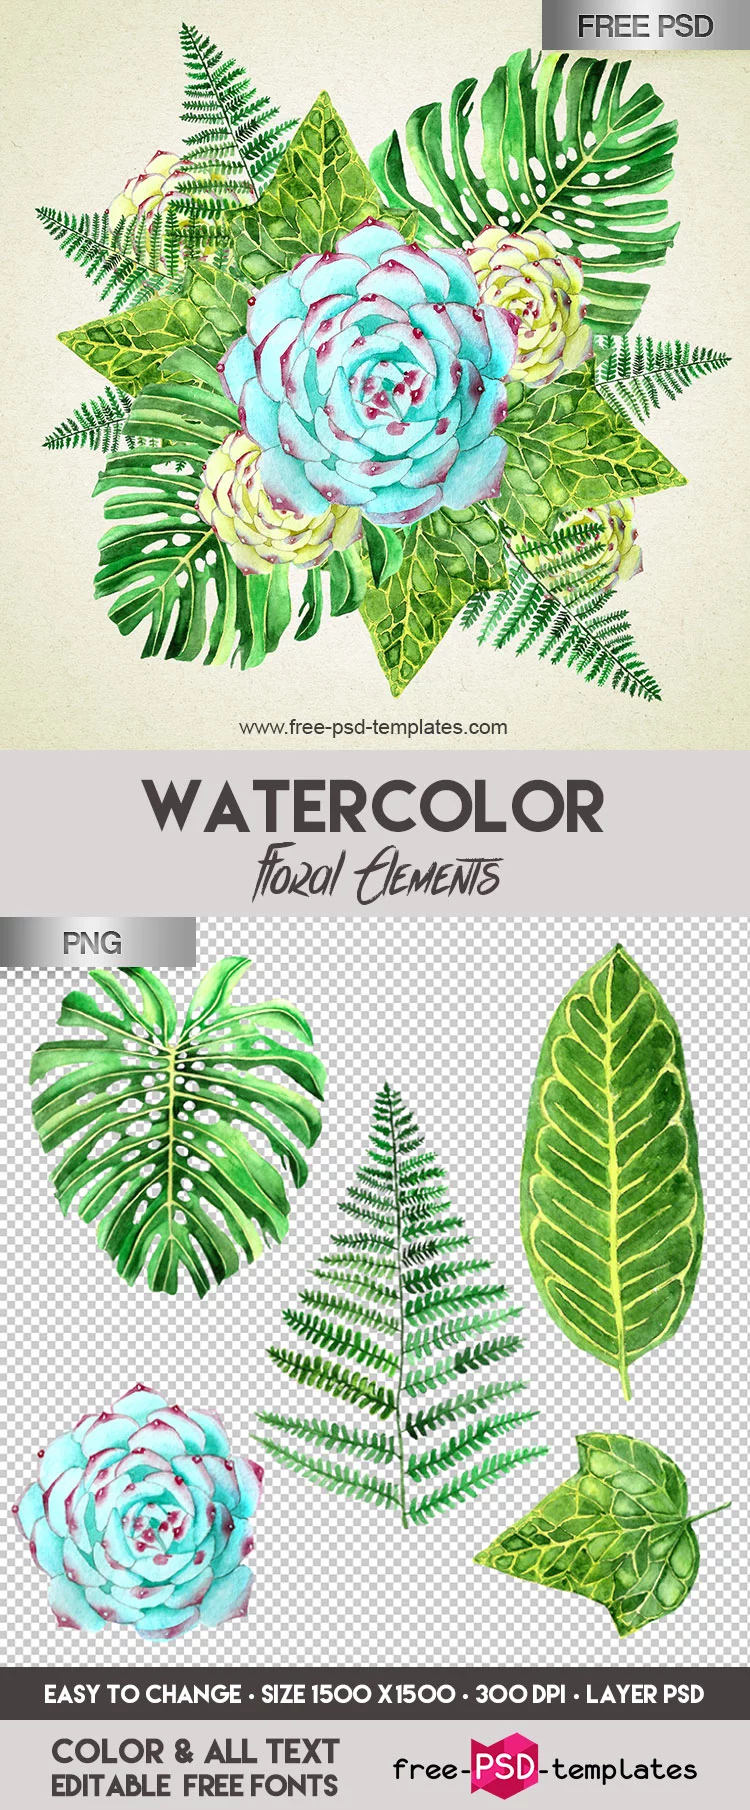 FREE Watercolor Floral Elements IN PSD